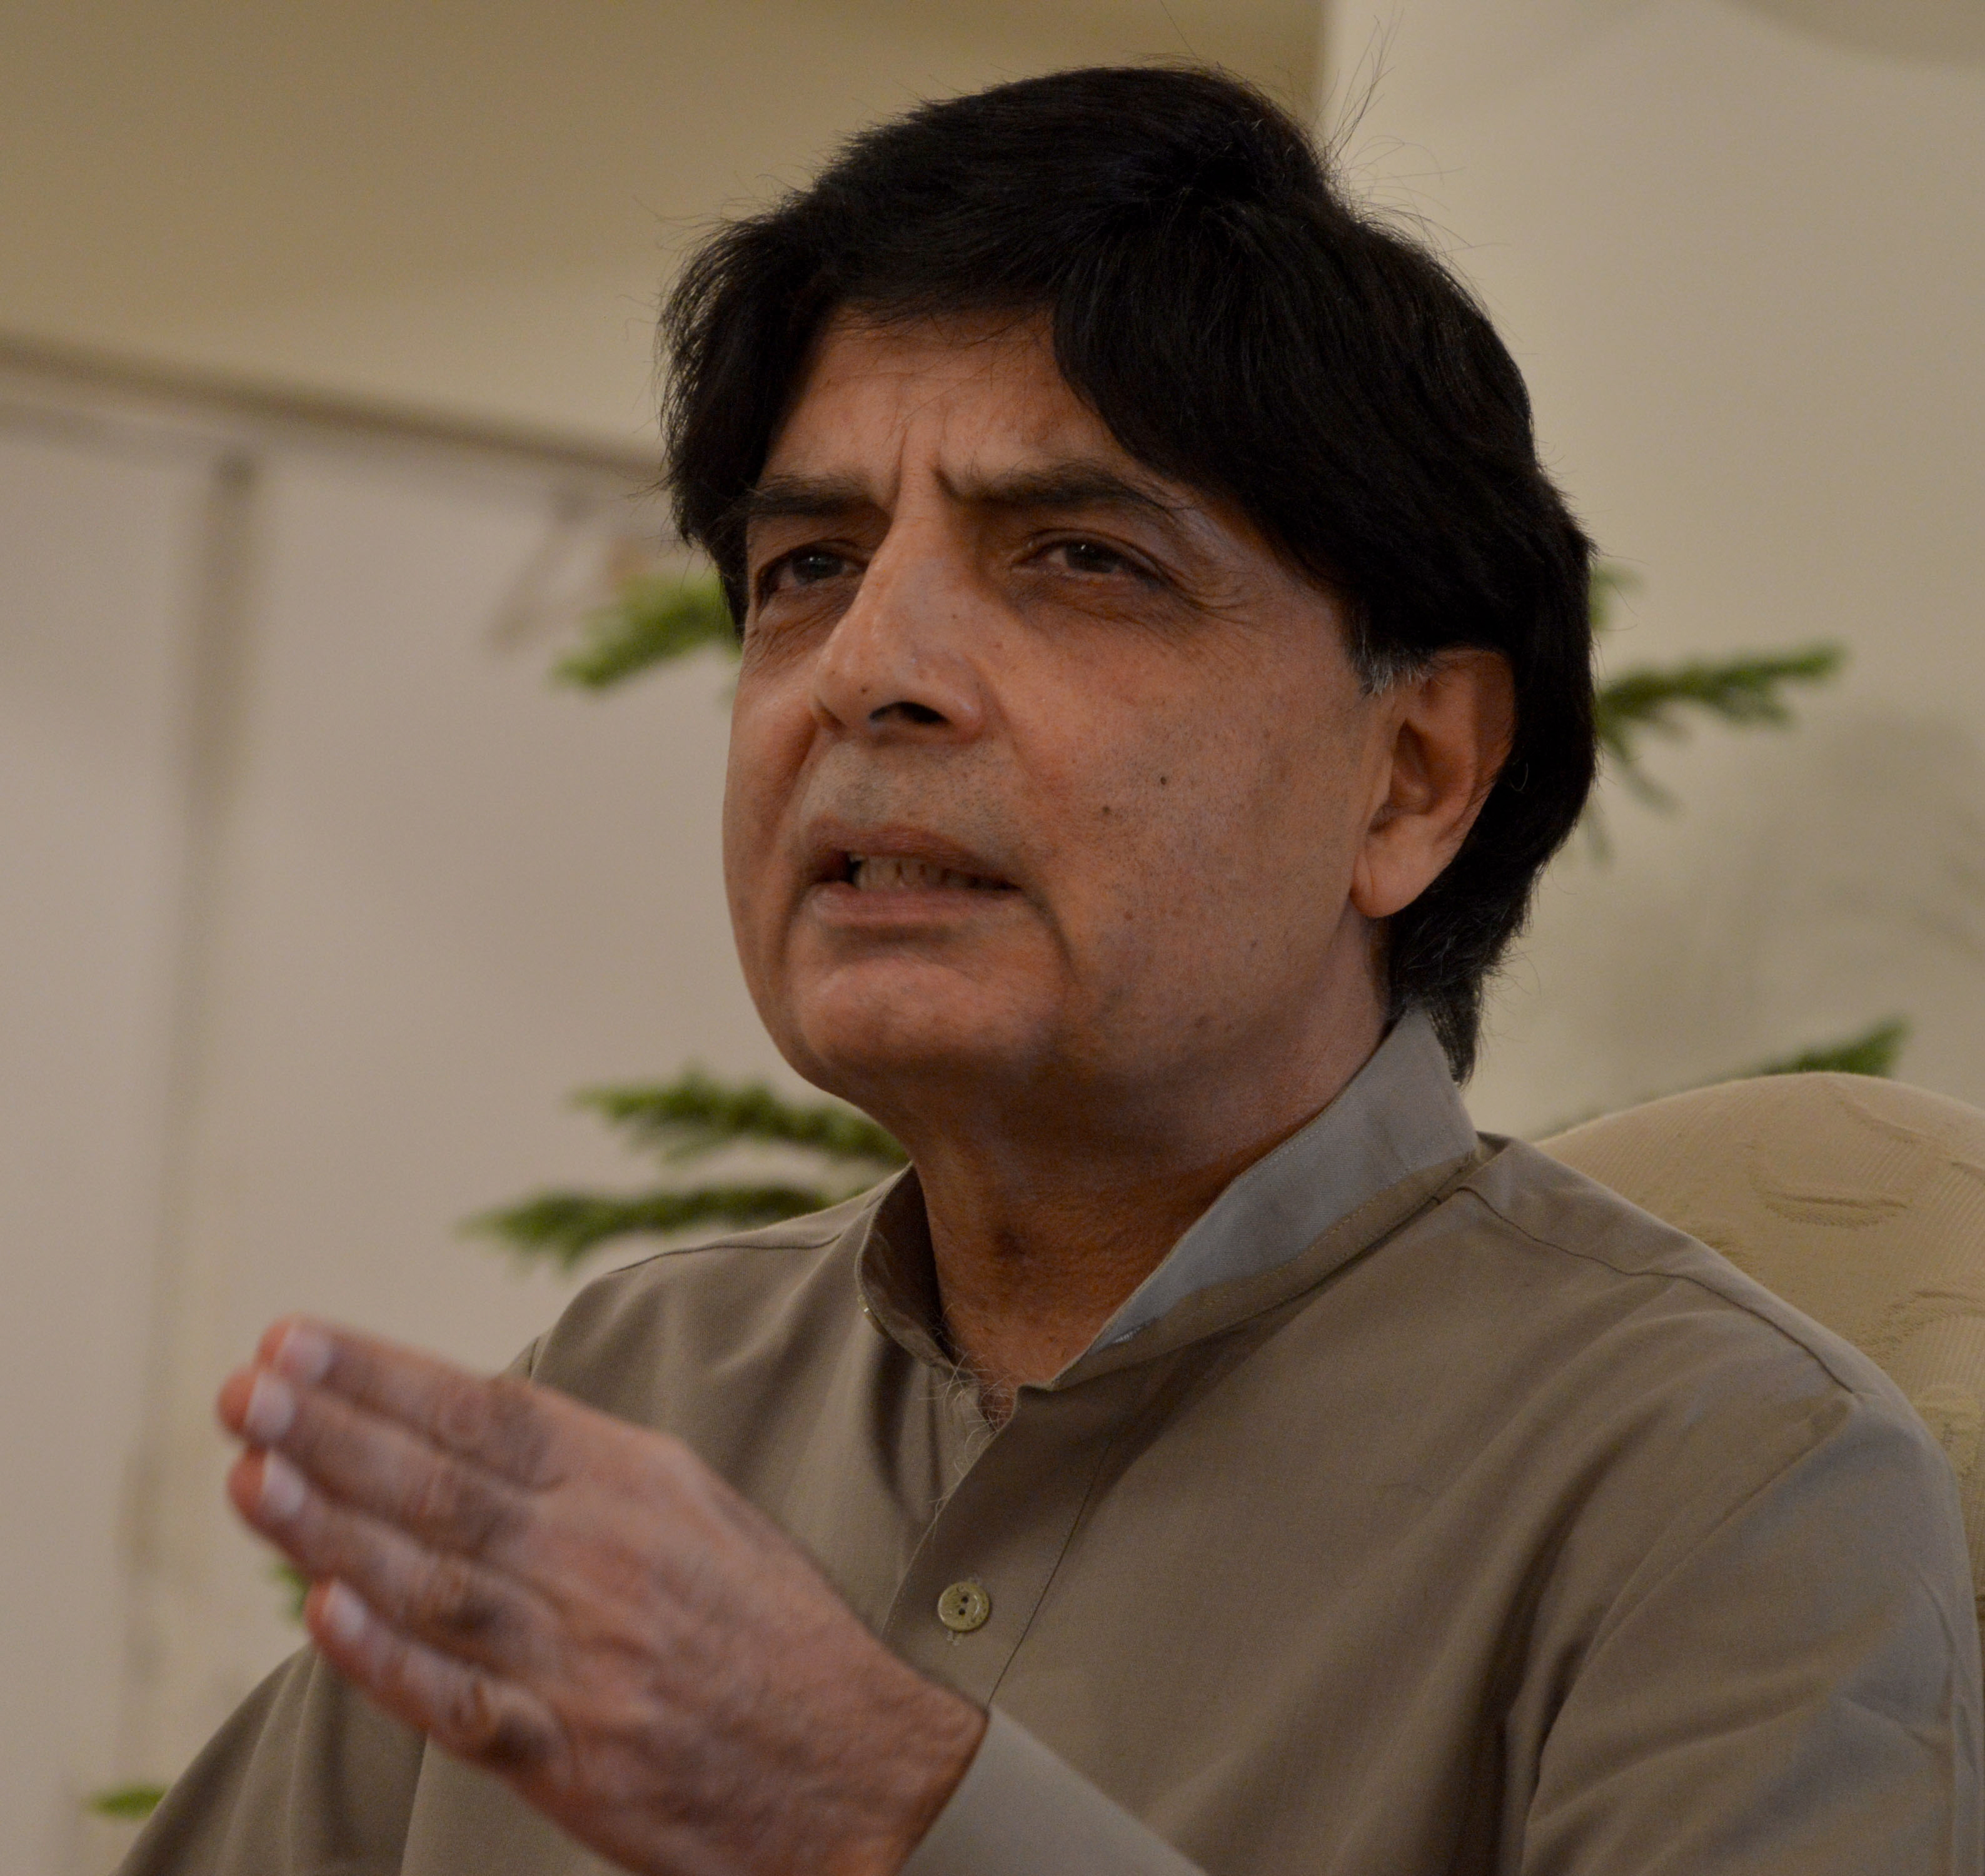 interior minister chaudhry nisar addresses a press conference at the punjab house in islamabad on october 1 2015 photo mudassar raja express